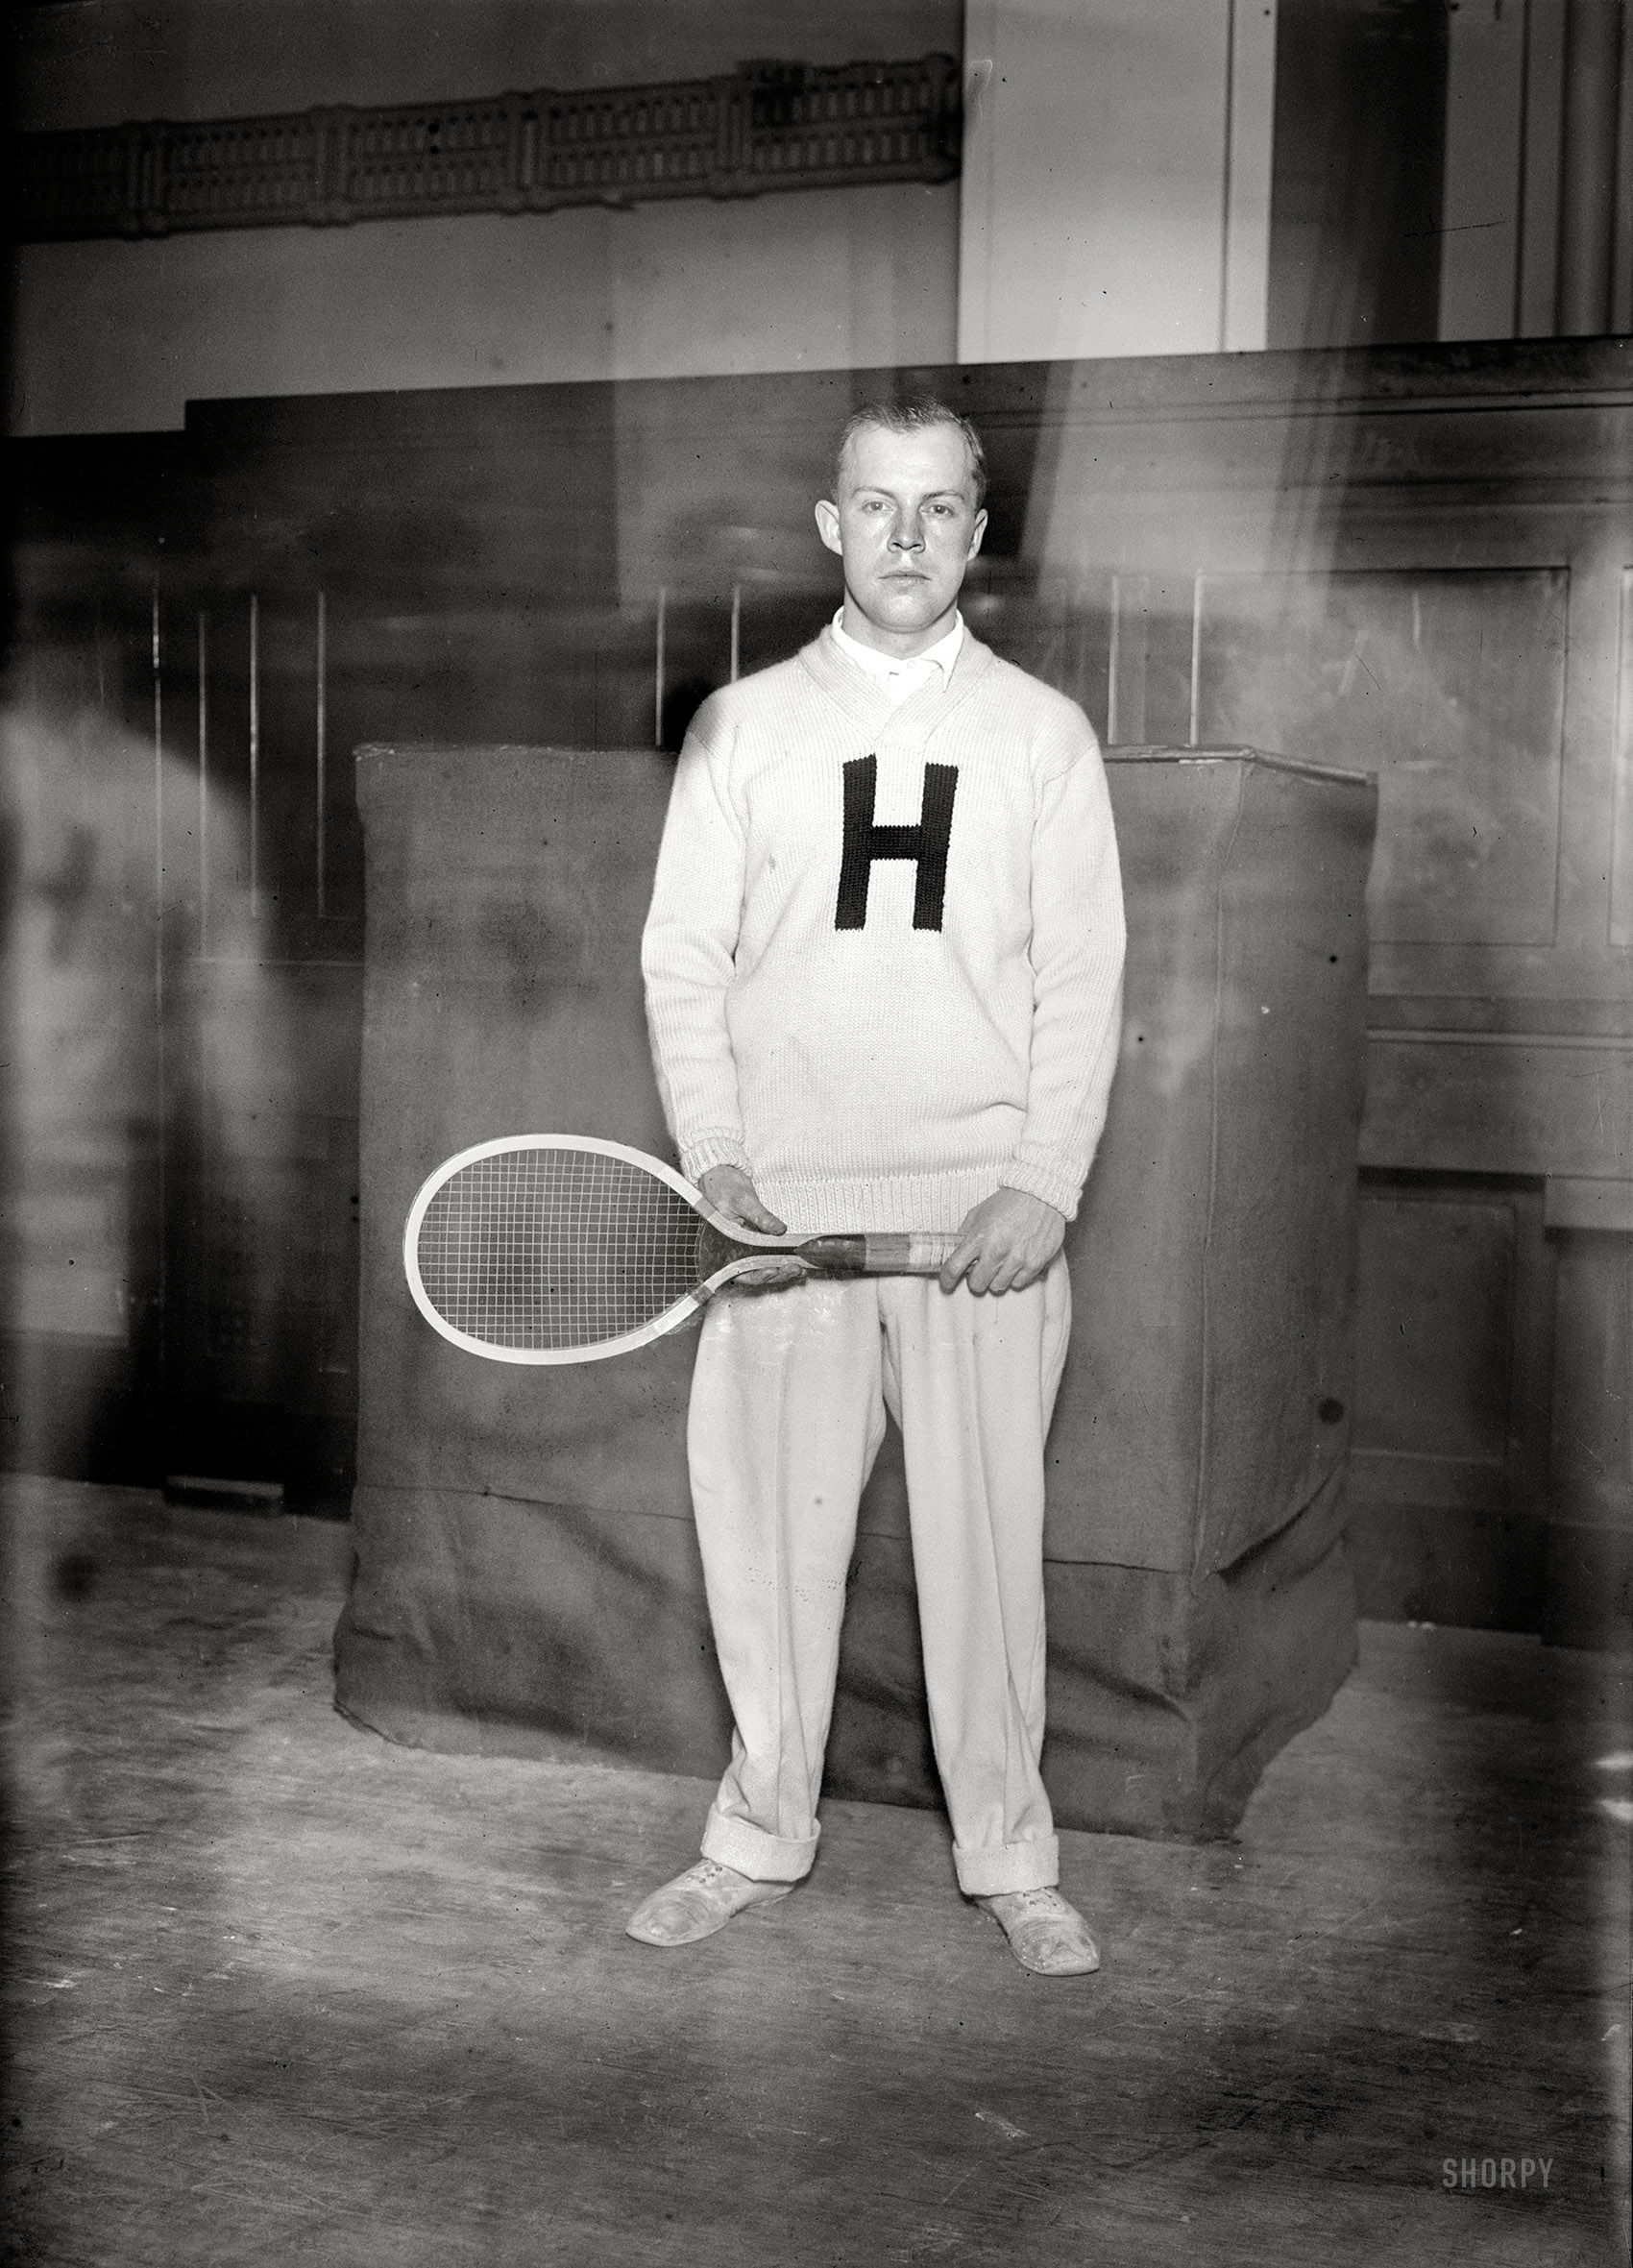 New York, 1915. "E.H. Whitney -- Harvard tennis." 5x7 glass negative, George Grantham Bain Collection. View full size.